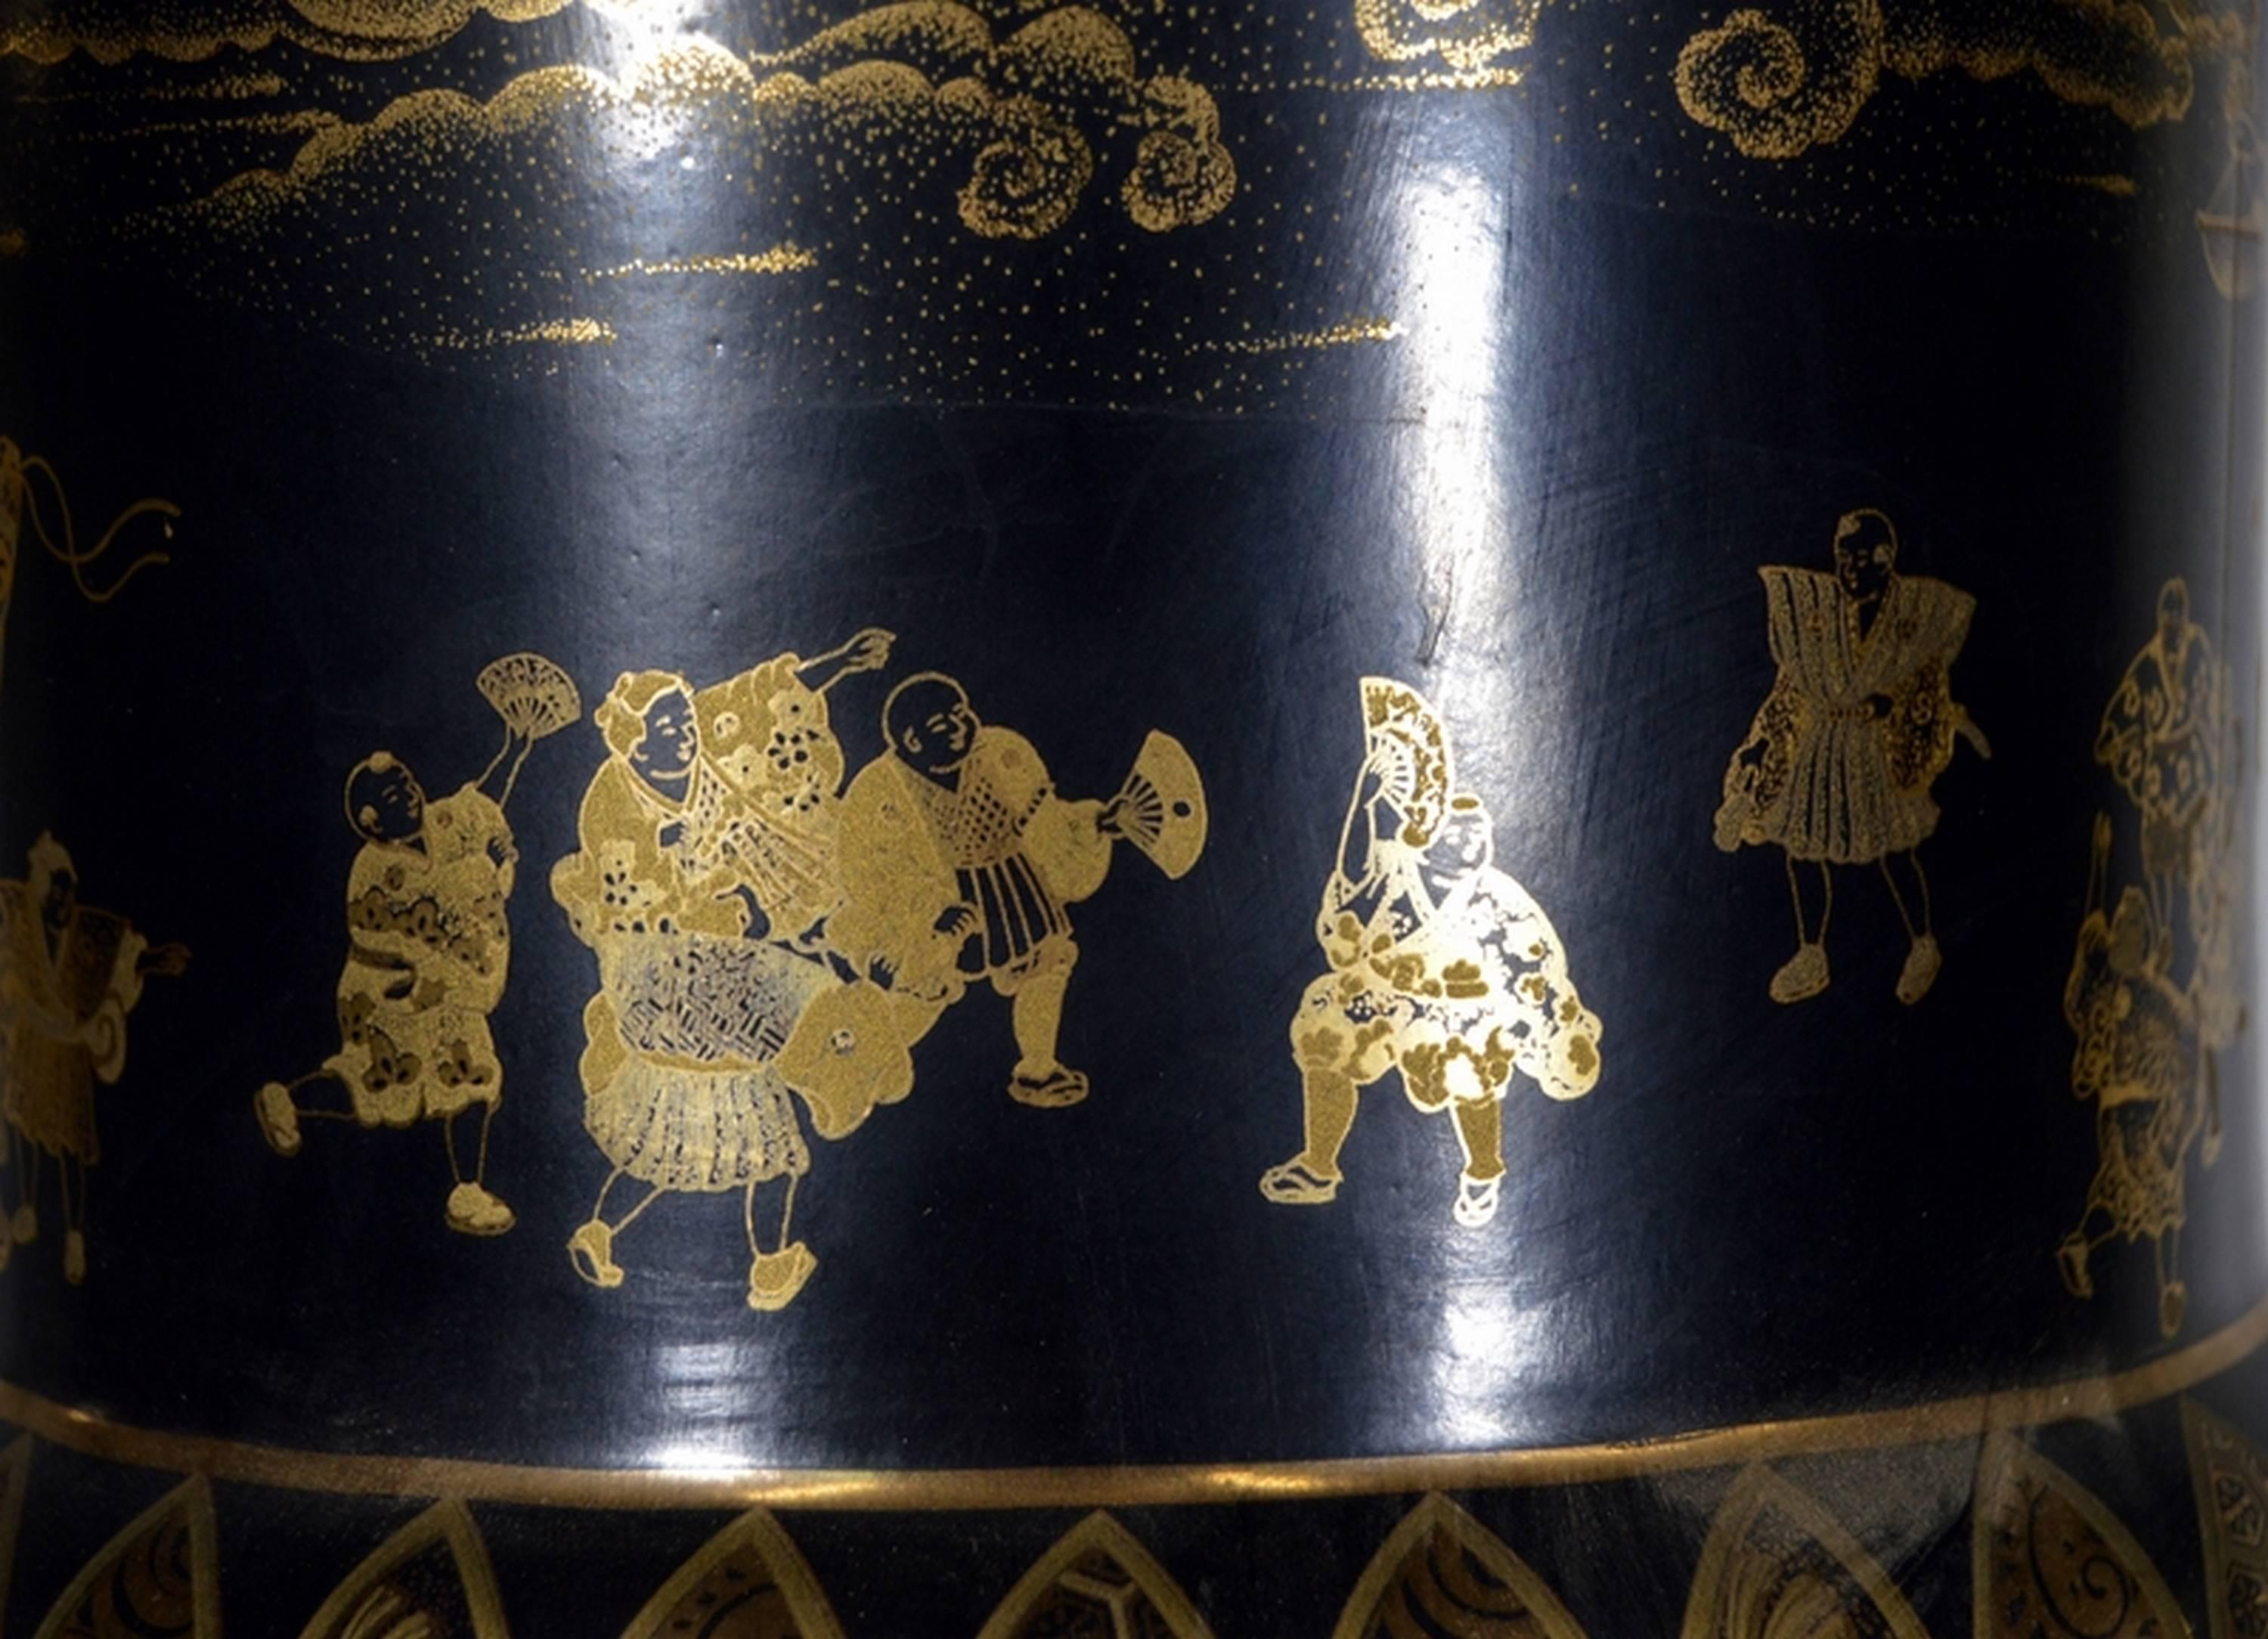 Chinese Vintage Black and Golden Hand-Painted Porcelain Vase from China, 20th Century For Sale